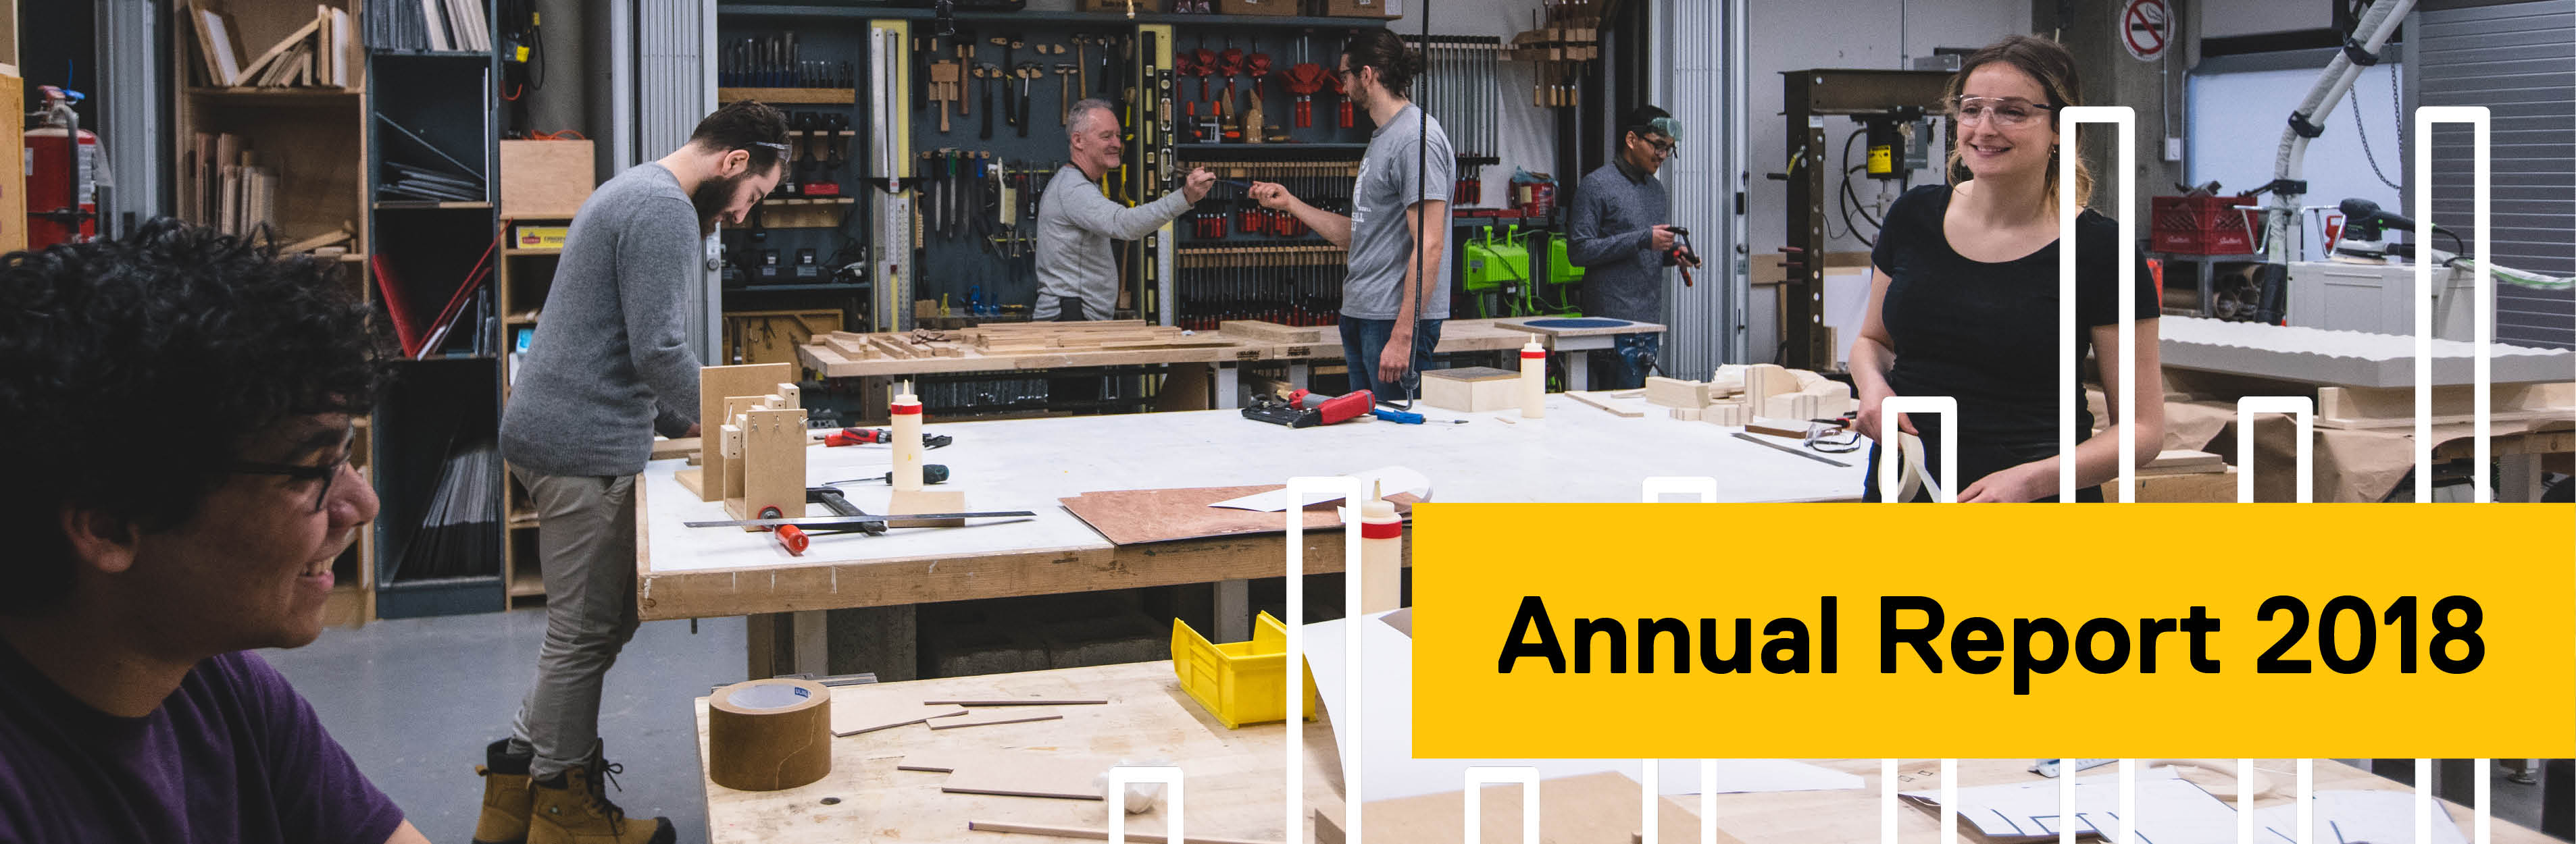 Annual Report 2018: A group of architecture students in a workshop.